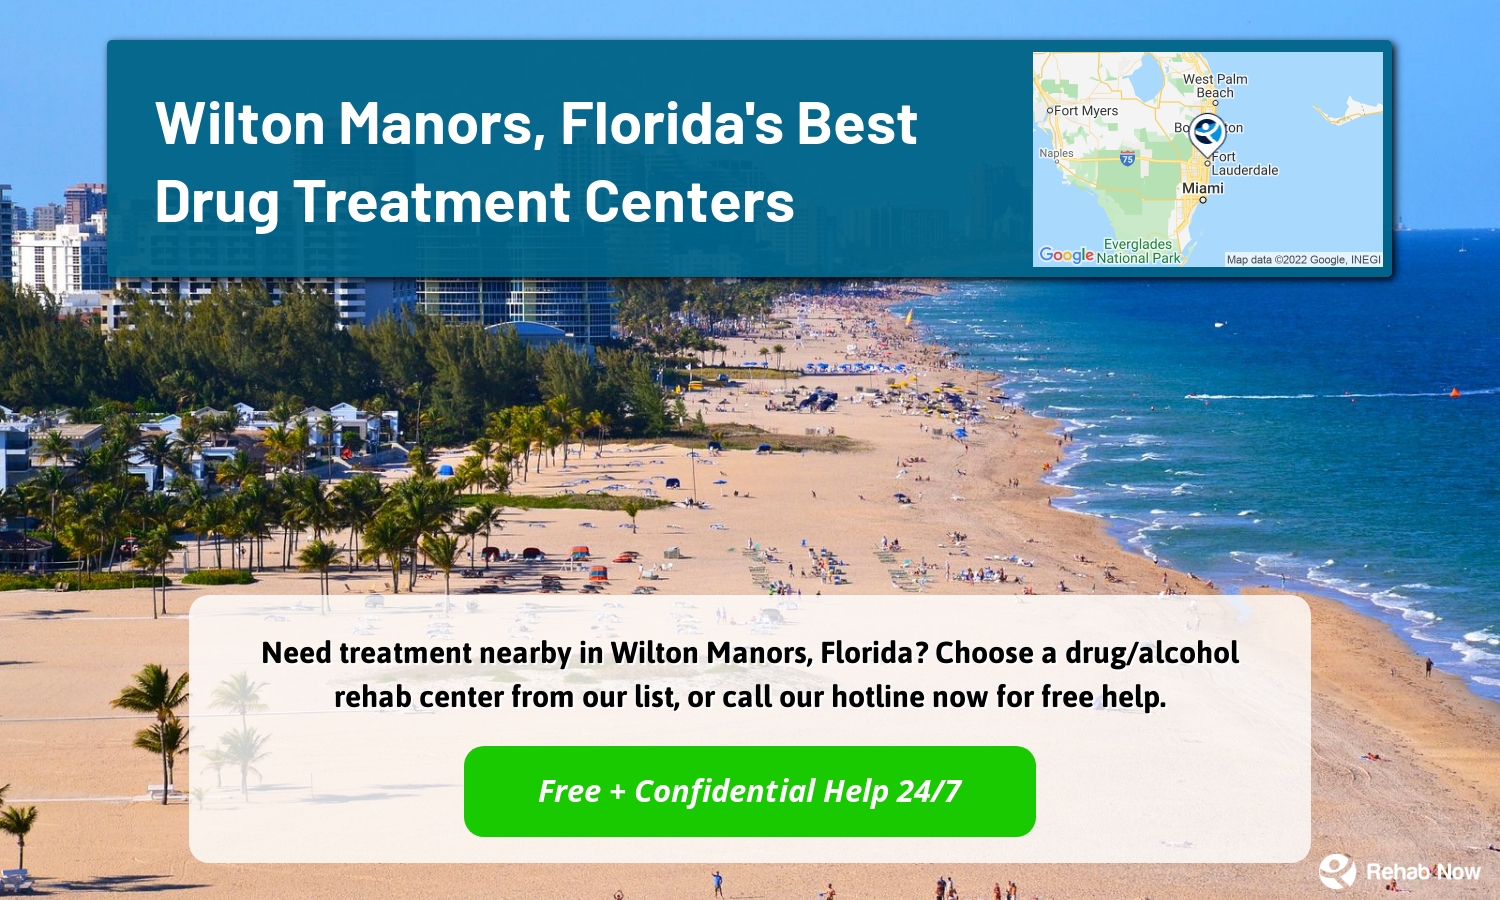 Need treatment nearby in Wilton Manors, Florida? Choose a drug/alcohol rehab center from our list, or call our hotline now for free help.